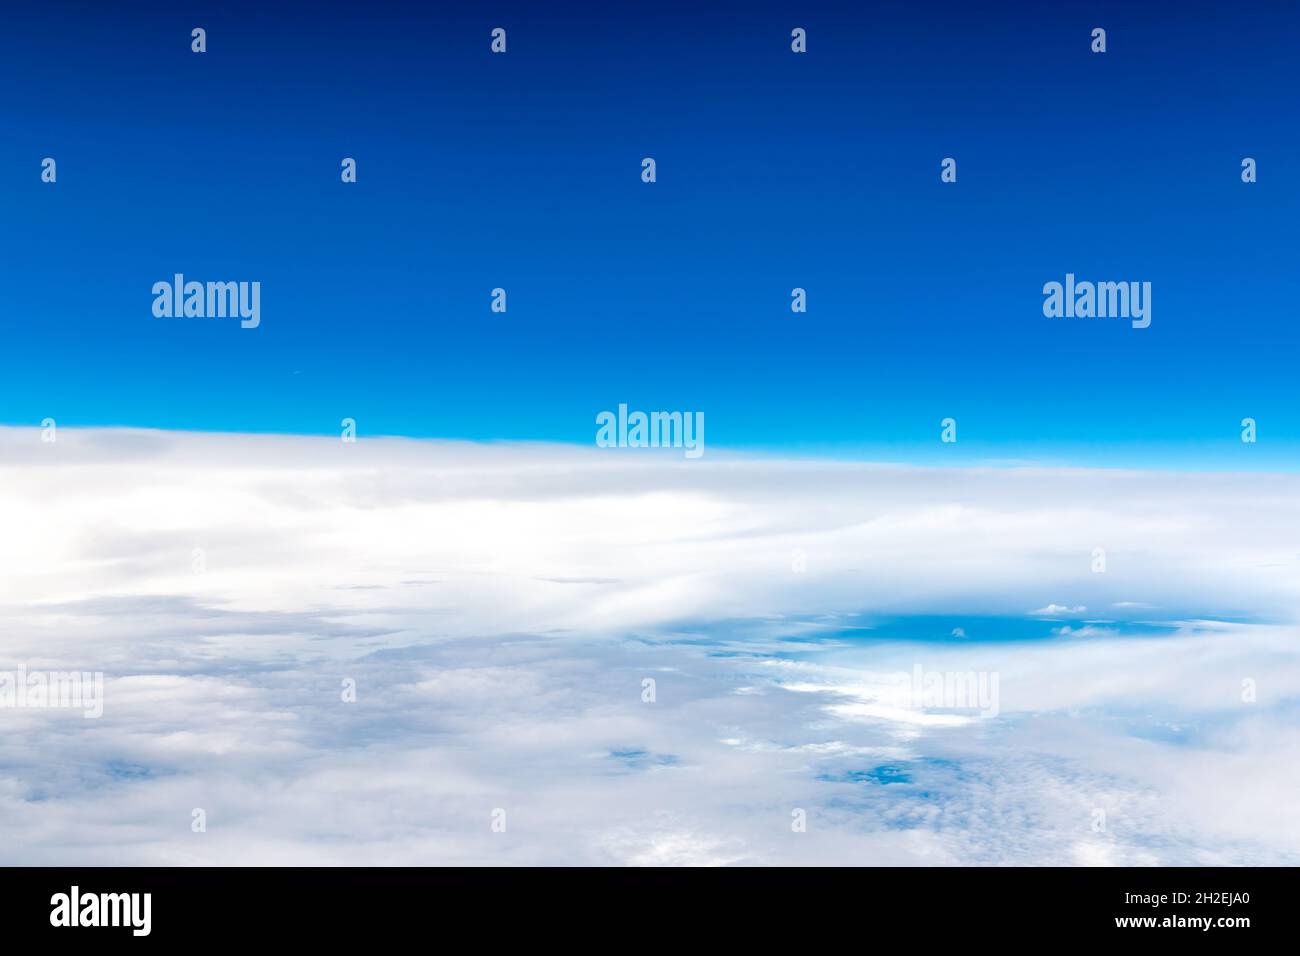 Simplicity and beauty of clouds in a blue sky. Stock Photo